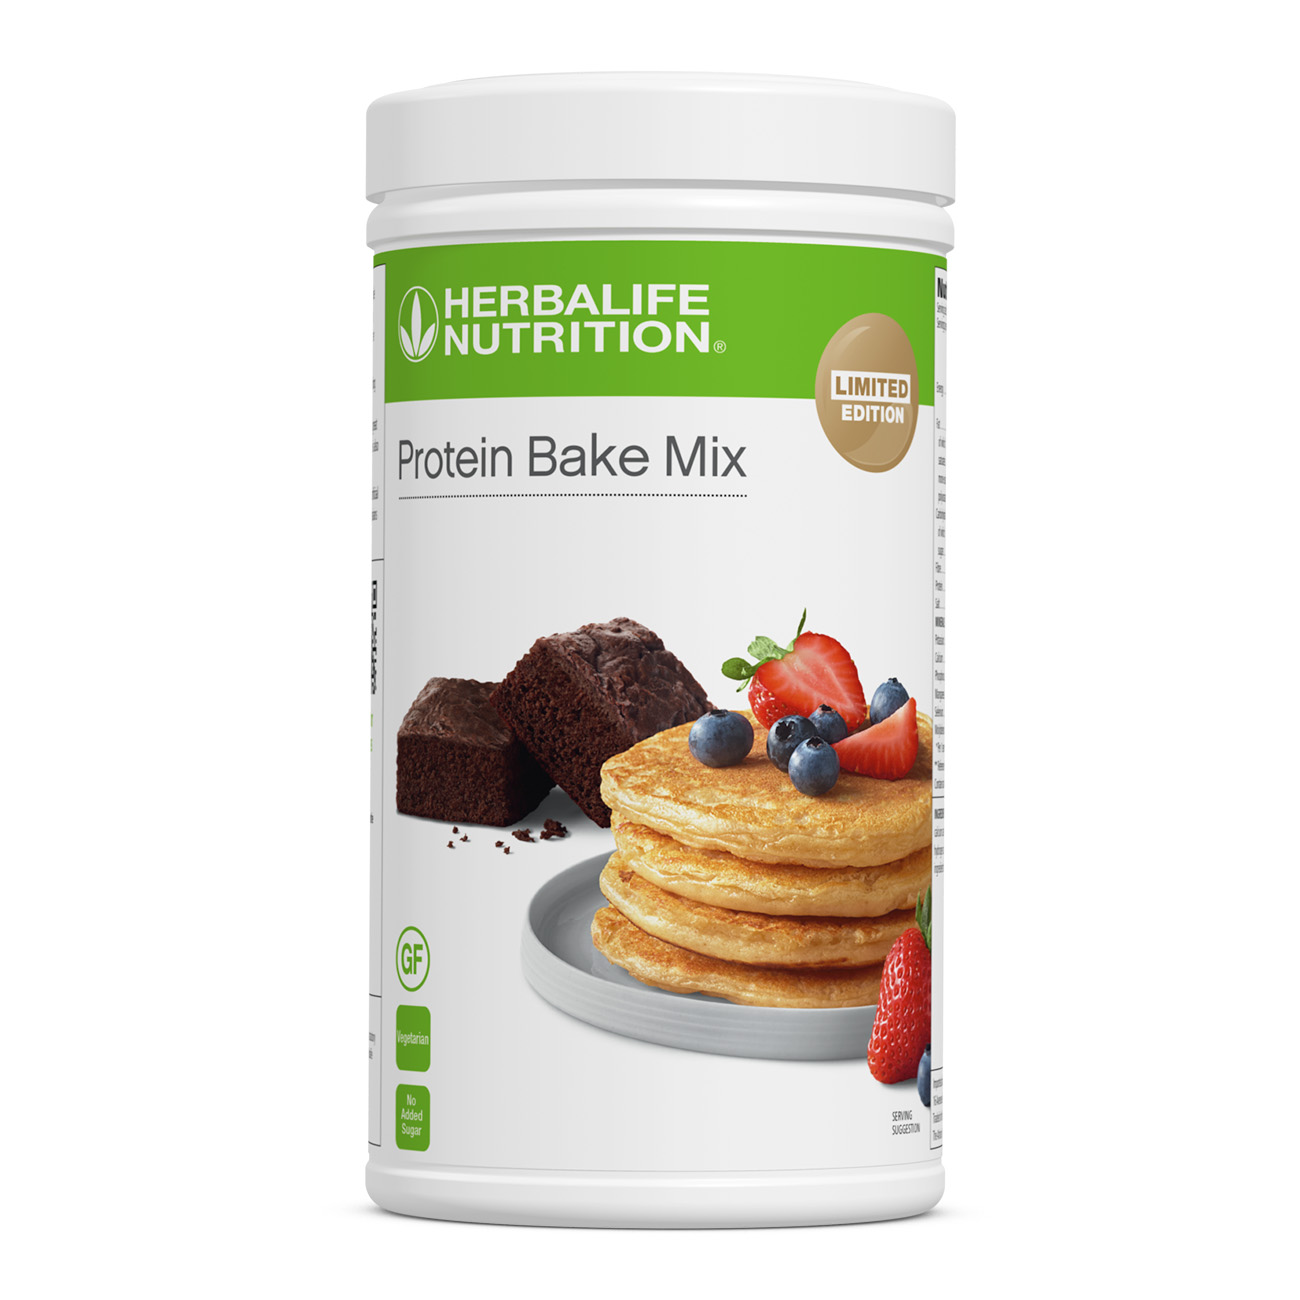 Our most versatile product, Protein Bake Mix is a ready-to-mix product which adds protein, fibre and minerals to your favourite recipes.